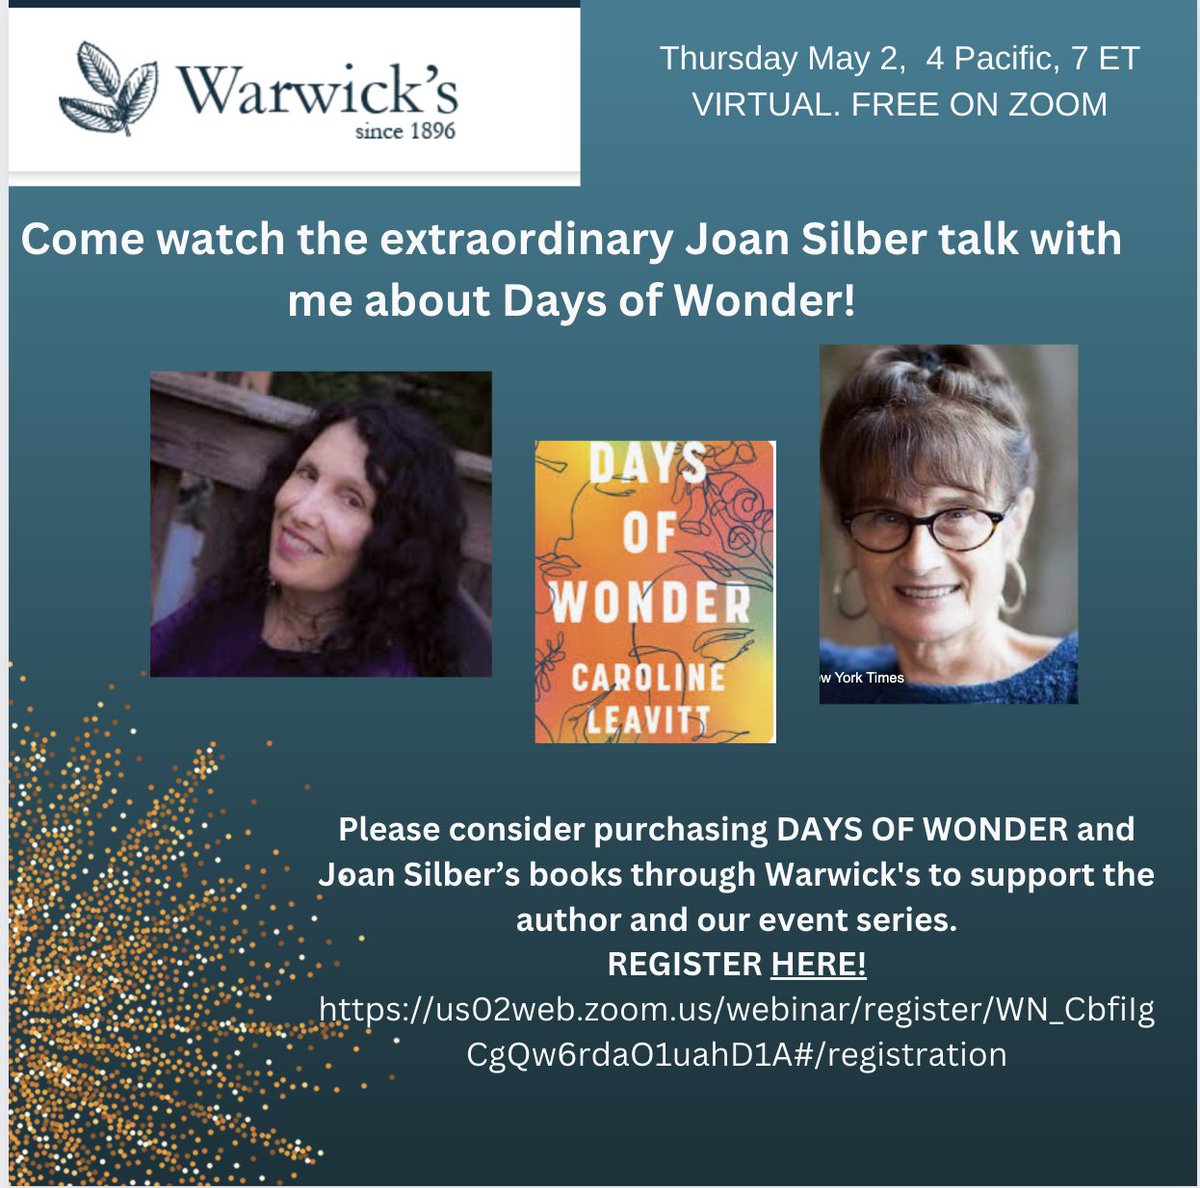 TODAY AT four Pacific, 7 eastern. I know this is supposed to be about me, but JOAN SILBER, PEOPLE!!! JOAN SILBER!!! @joansilber